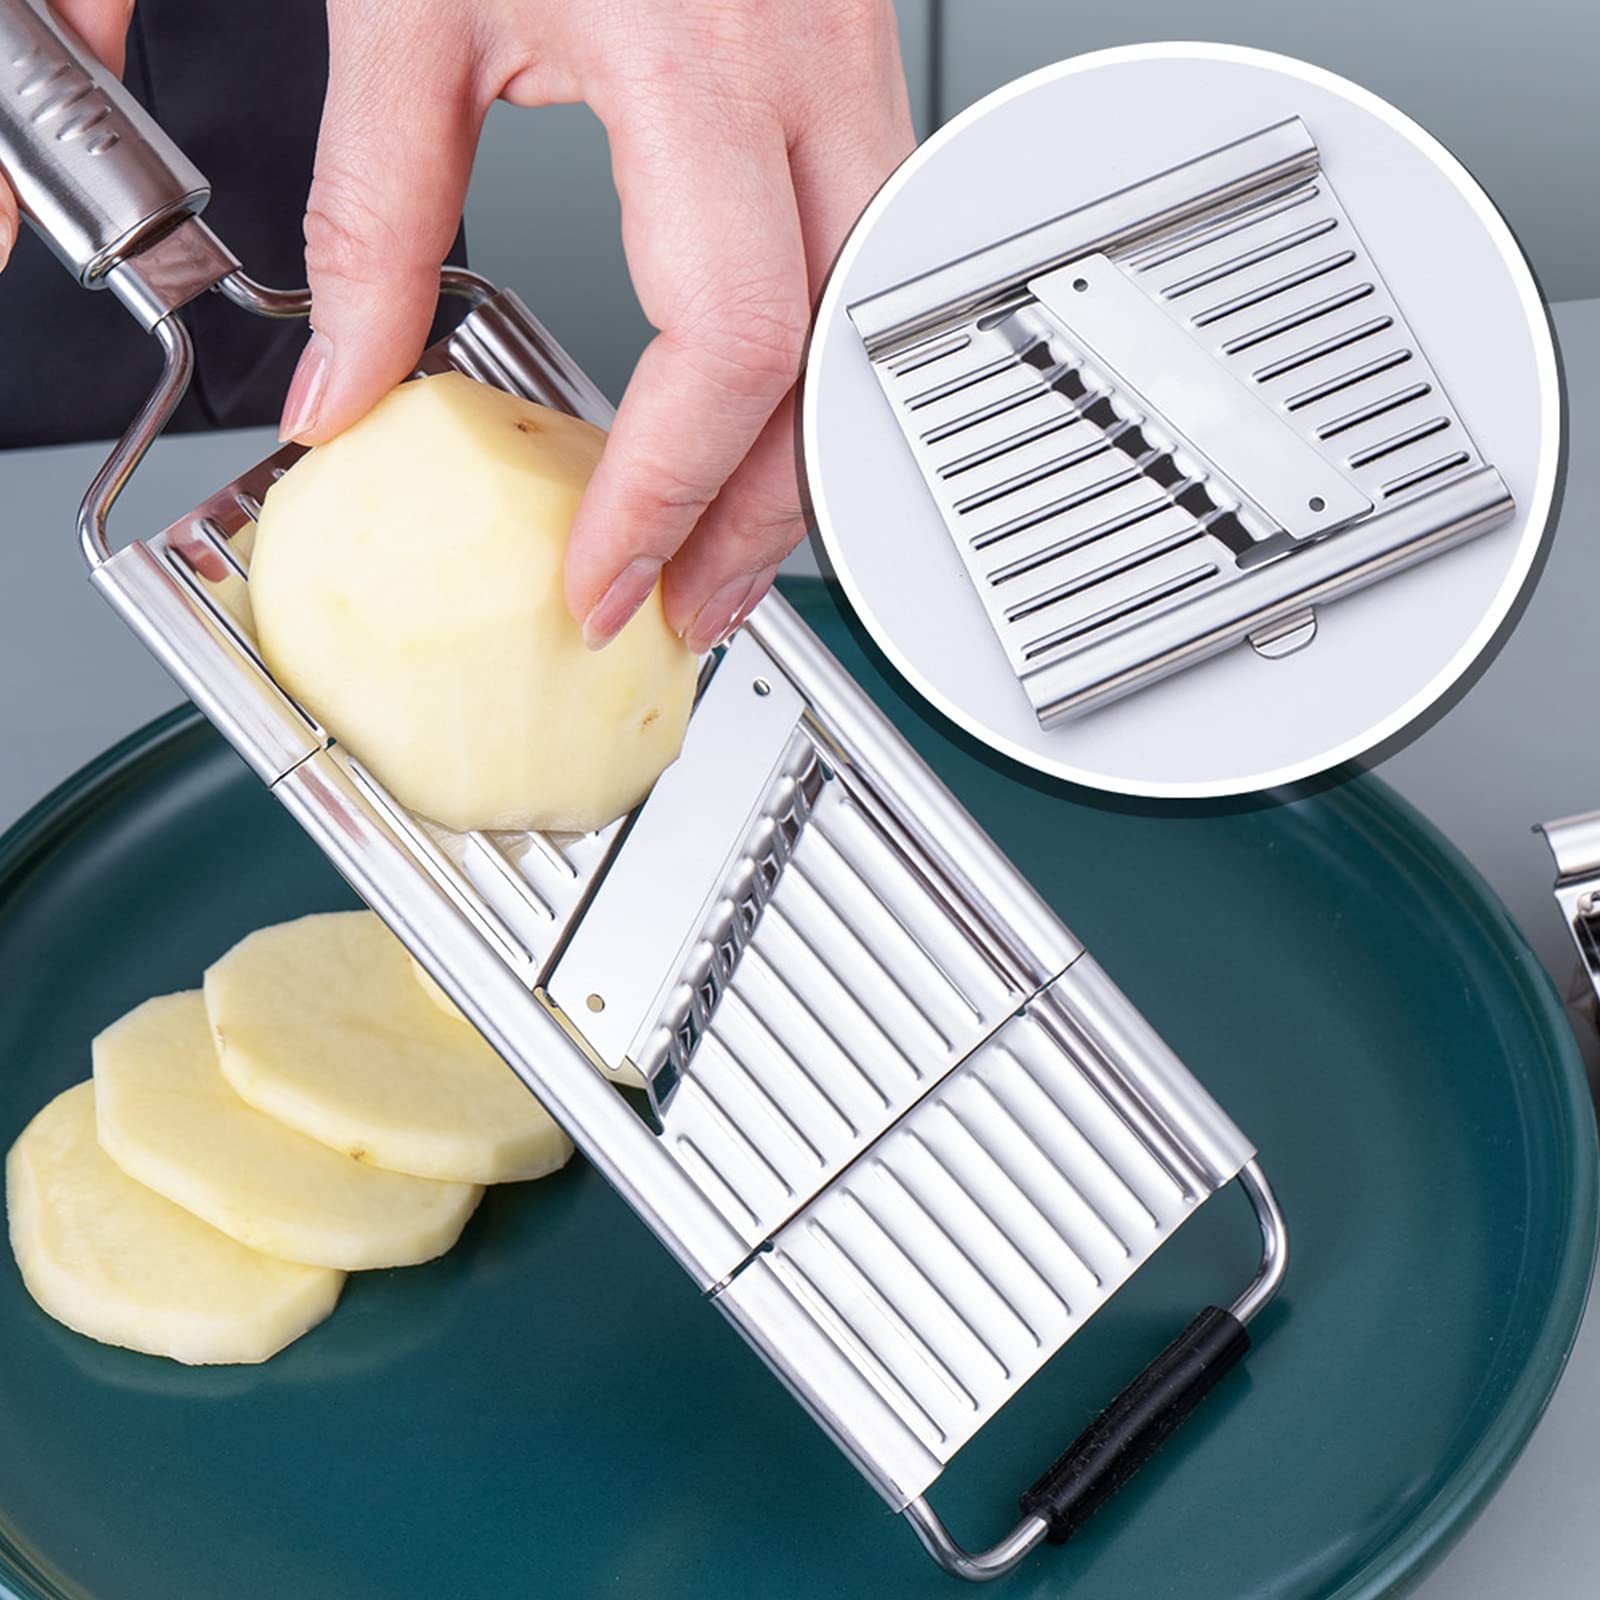 👨Early Father's Day Sale - 70% OFF 🔪Multi-Purpose Vegetable Slicer Cuts Set | Buy 2 Free Shipping